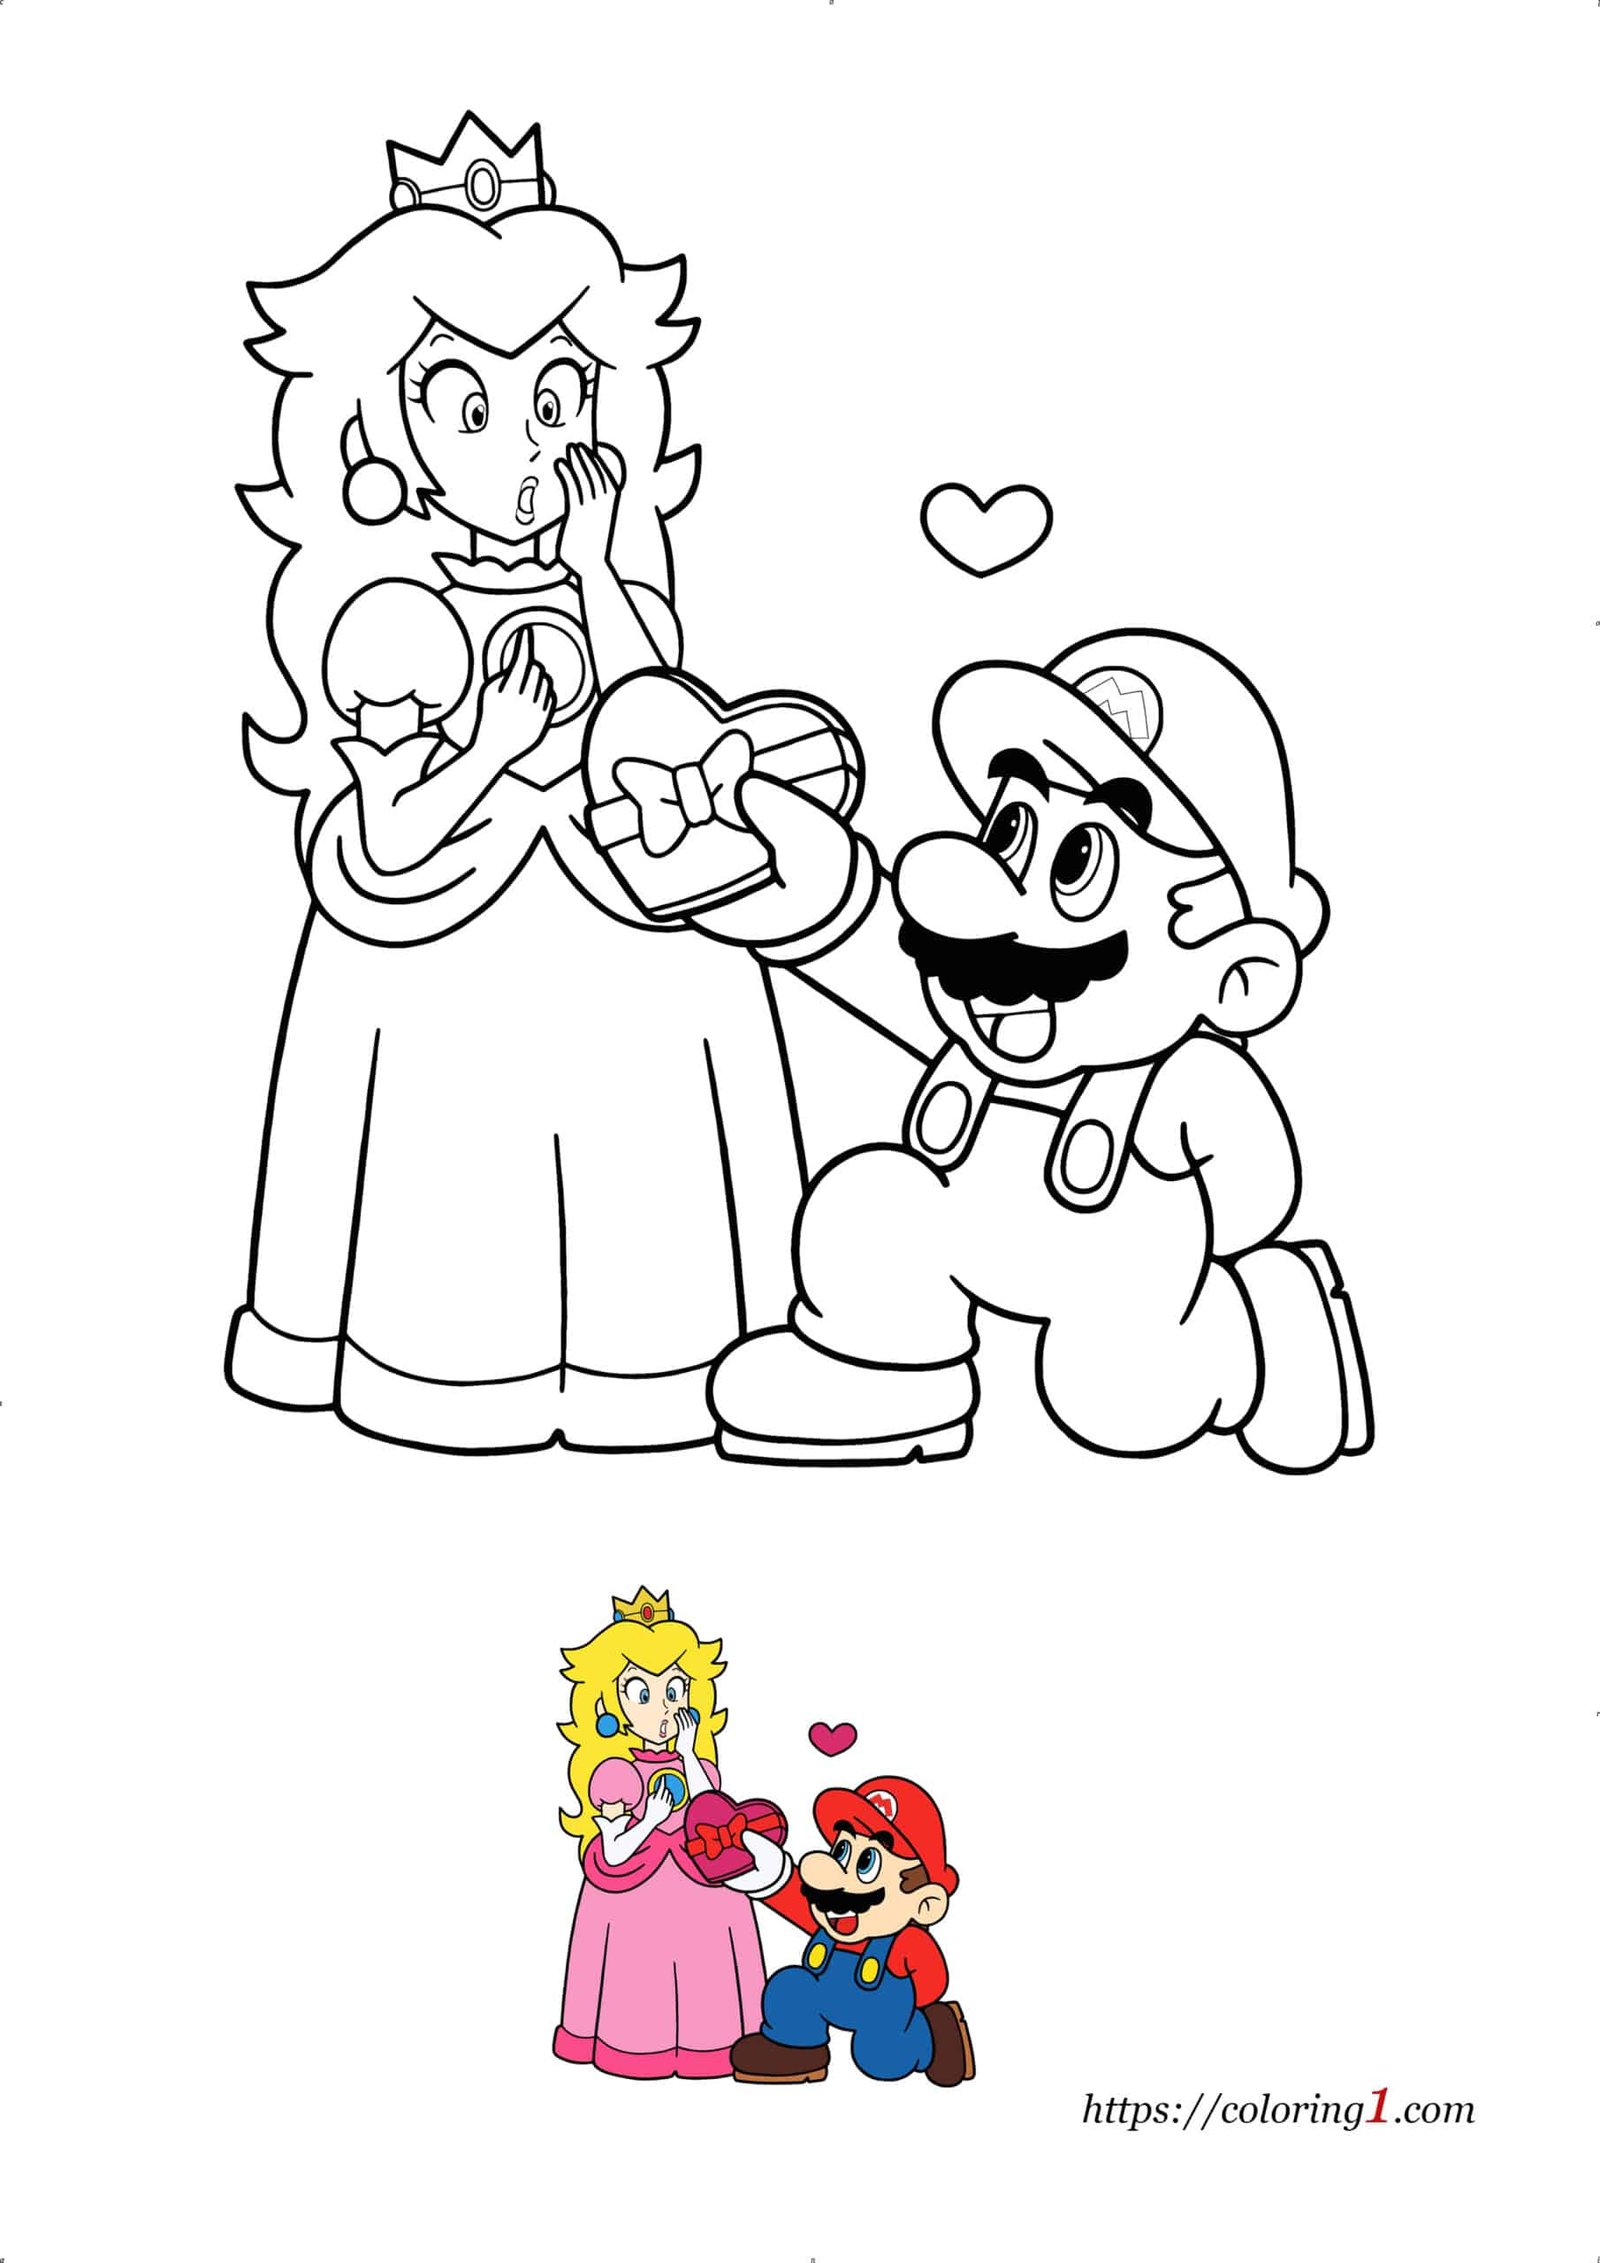 Mario and peach coloring pages